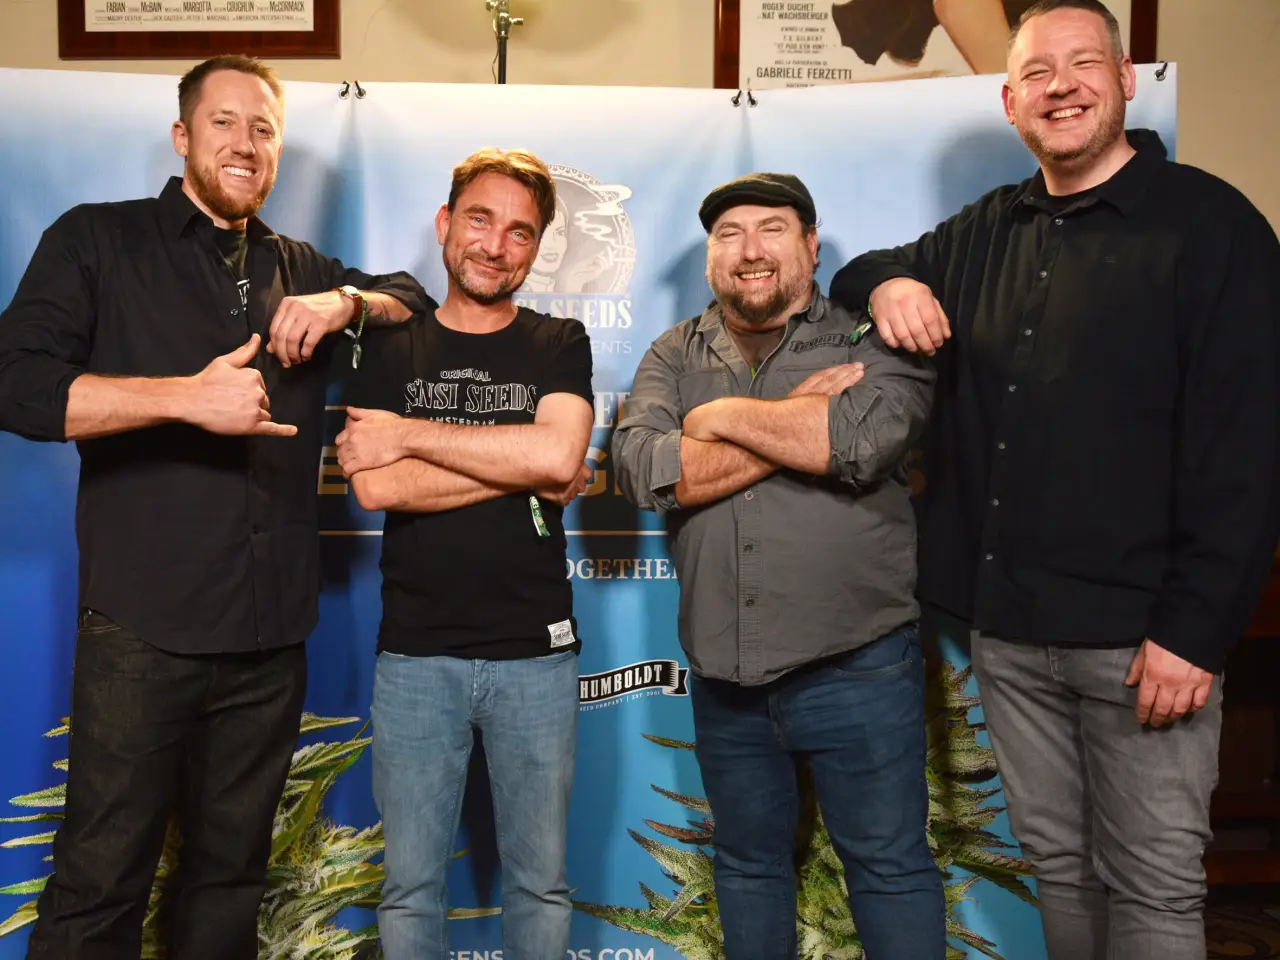 (From left) Ben Lind, Ravi Dronkers, Nathaniel Pennington and Sander Landsaat celebrate their seed collaboration project at the Hash Marihuana & Hemp Museum in Barcelona, Spain. / Courtesy Humboldt Seed Company